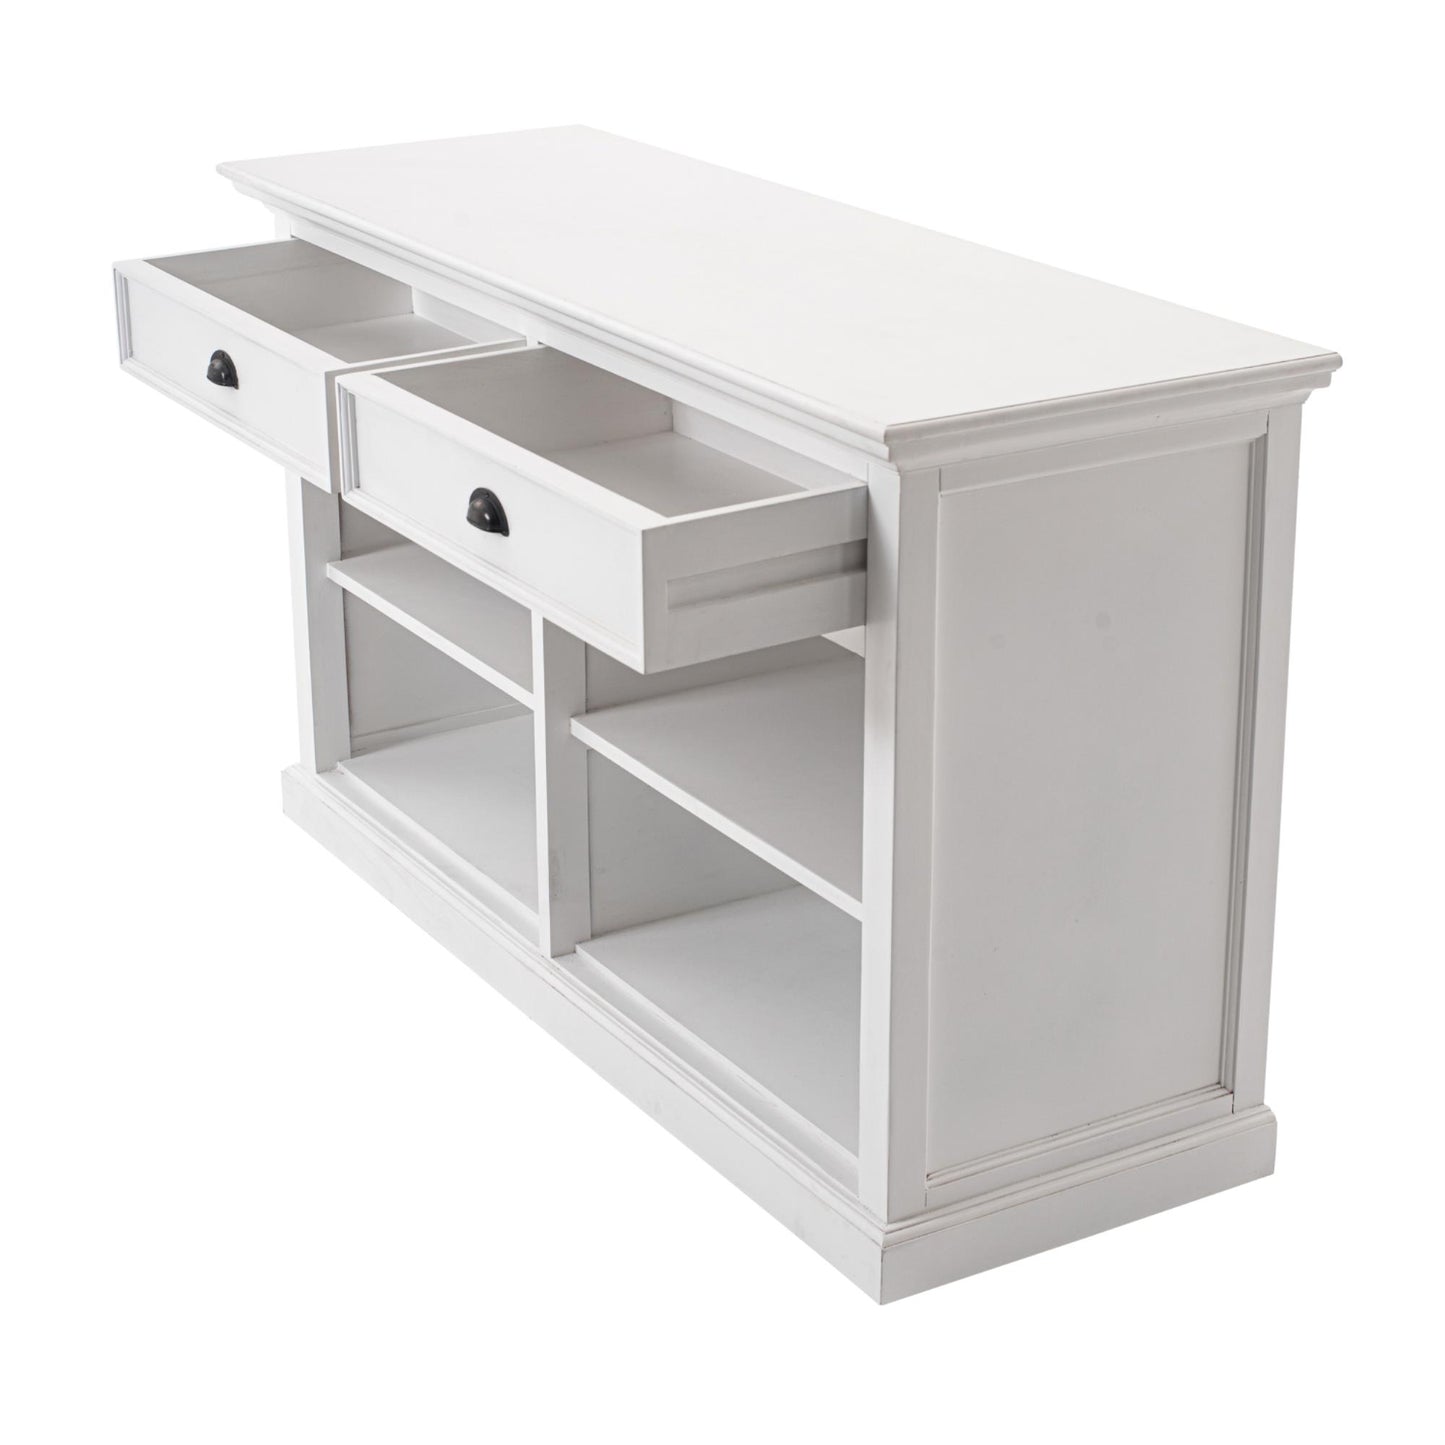 Halifax collection by Nova Solo.  Buffet with 2 Drawers CasaFenix